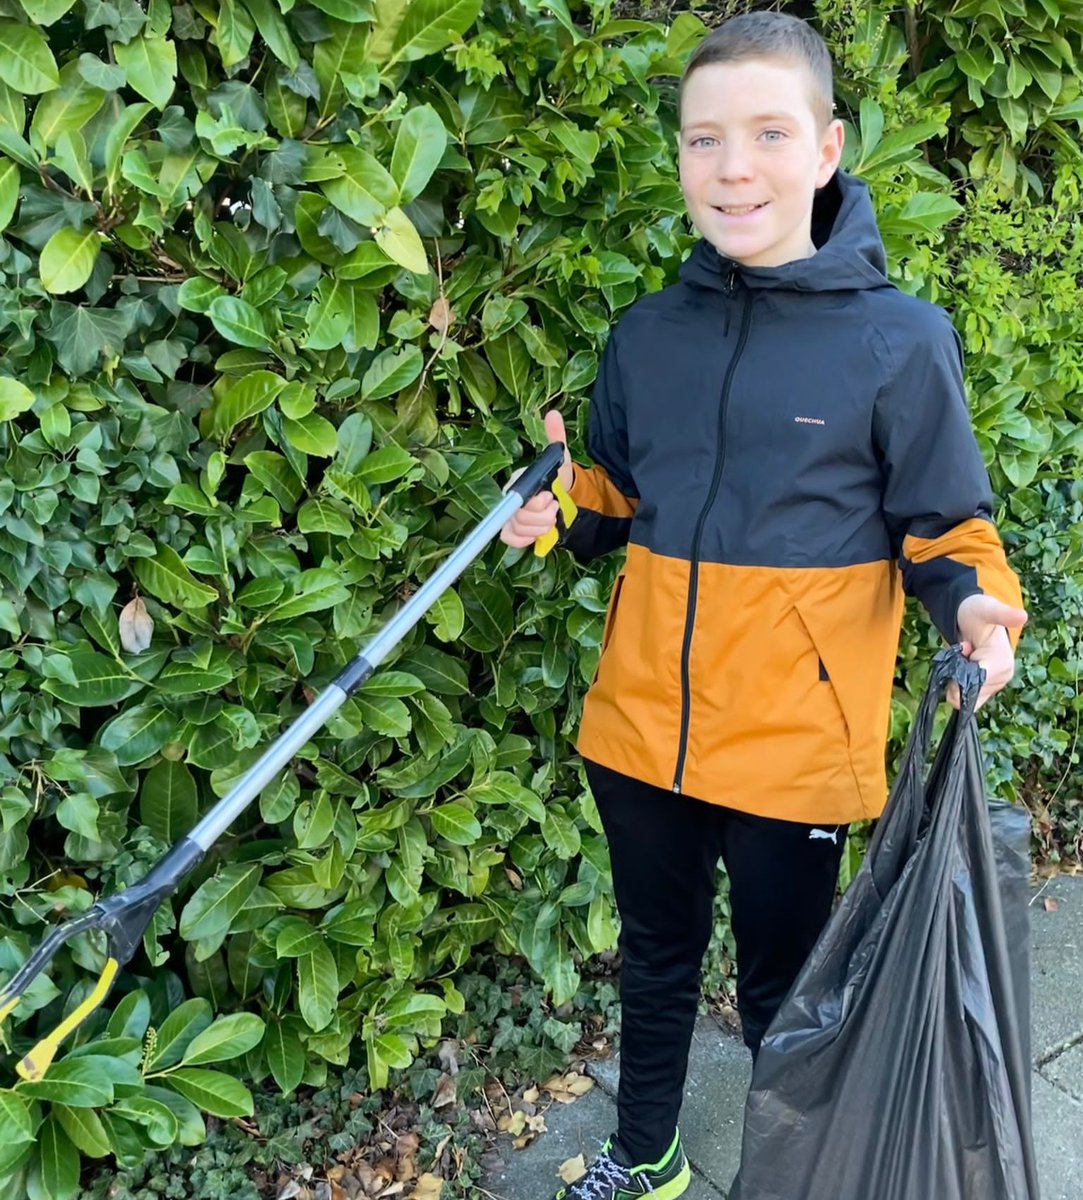 #DidYouKnow as part of our focus on the #Environment that nine members of the #EcoCommittee completed the BIG #SpringClean A big shout out too to Jude and his incredible commitment to our #Values in our local community!